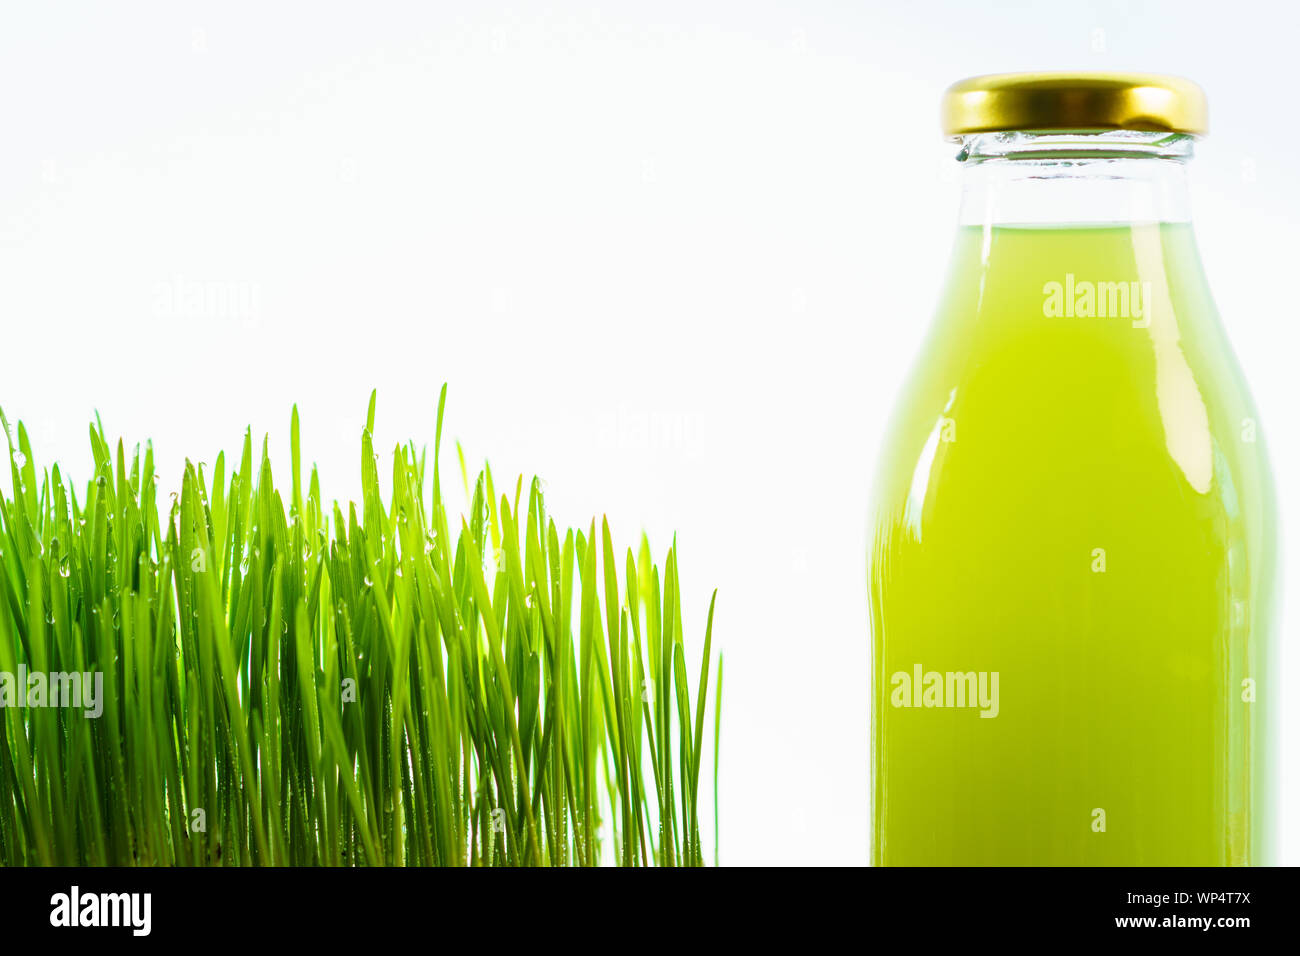 Close-up view of fresh young wheatgrass growing in a pot with a reusable bottle of juice. Stock Photo